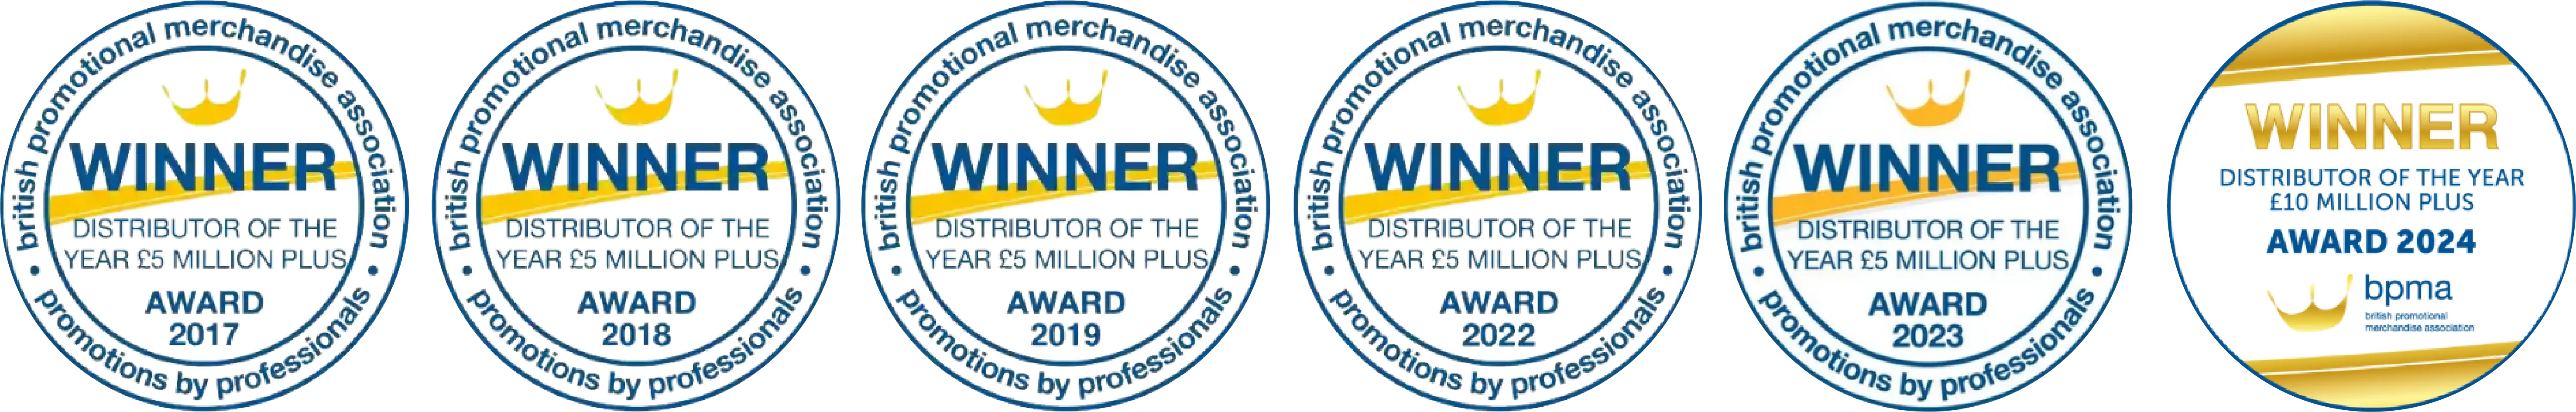 1st Place: BPMA Distributor of the Year 2017, 2018, 2019 & 2022